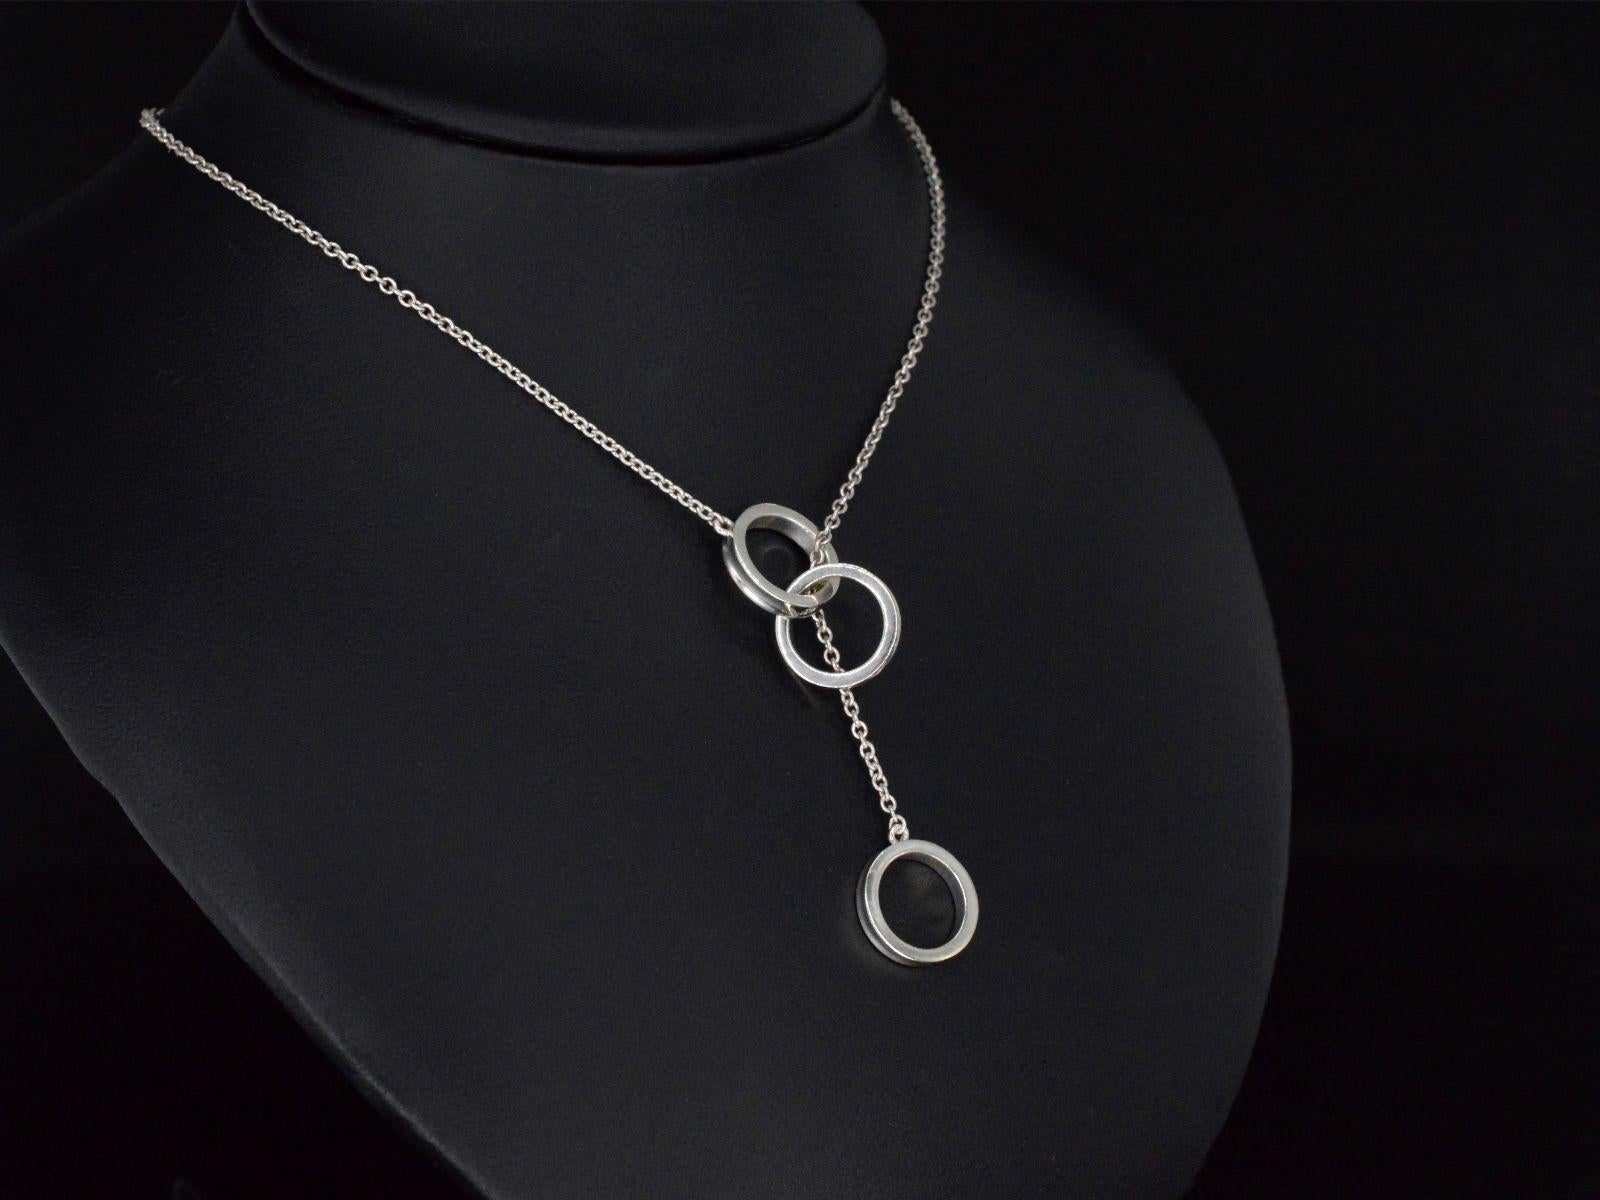 A stylish Tiffany & Co necklace featuring the elegant Interlocking Circles Pendant. This graceful necklace, weighing 5.0 grams and measuring 47.5 cm in length, is a testament to Tiffany & Co's timeless design. Crafted from sterling silver 925, it